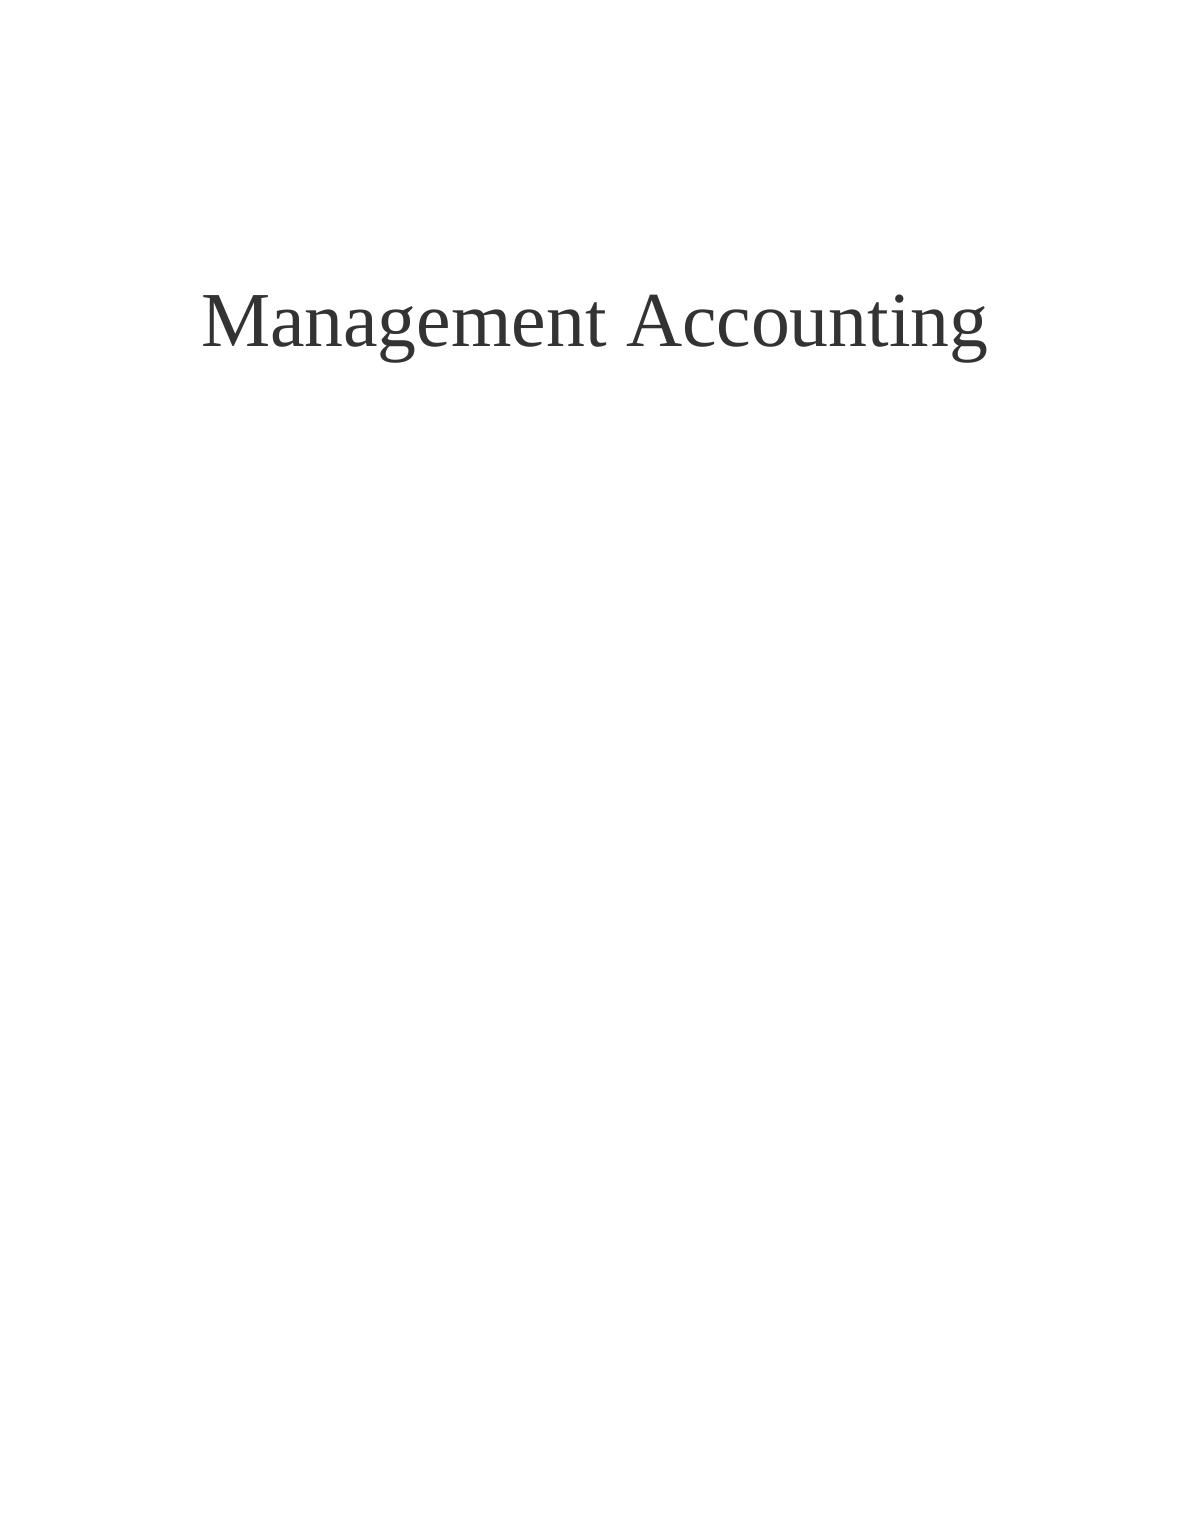 Introduction to Management Accounting_1